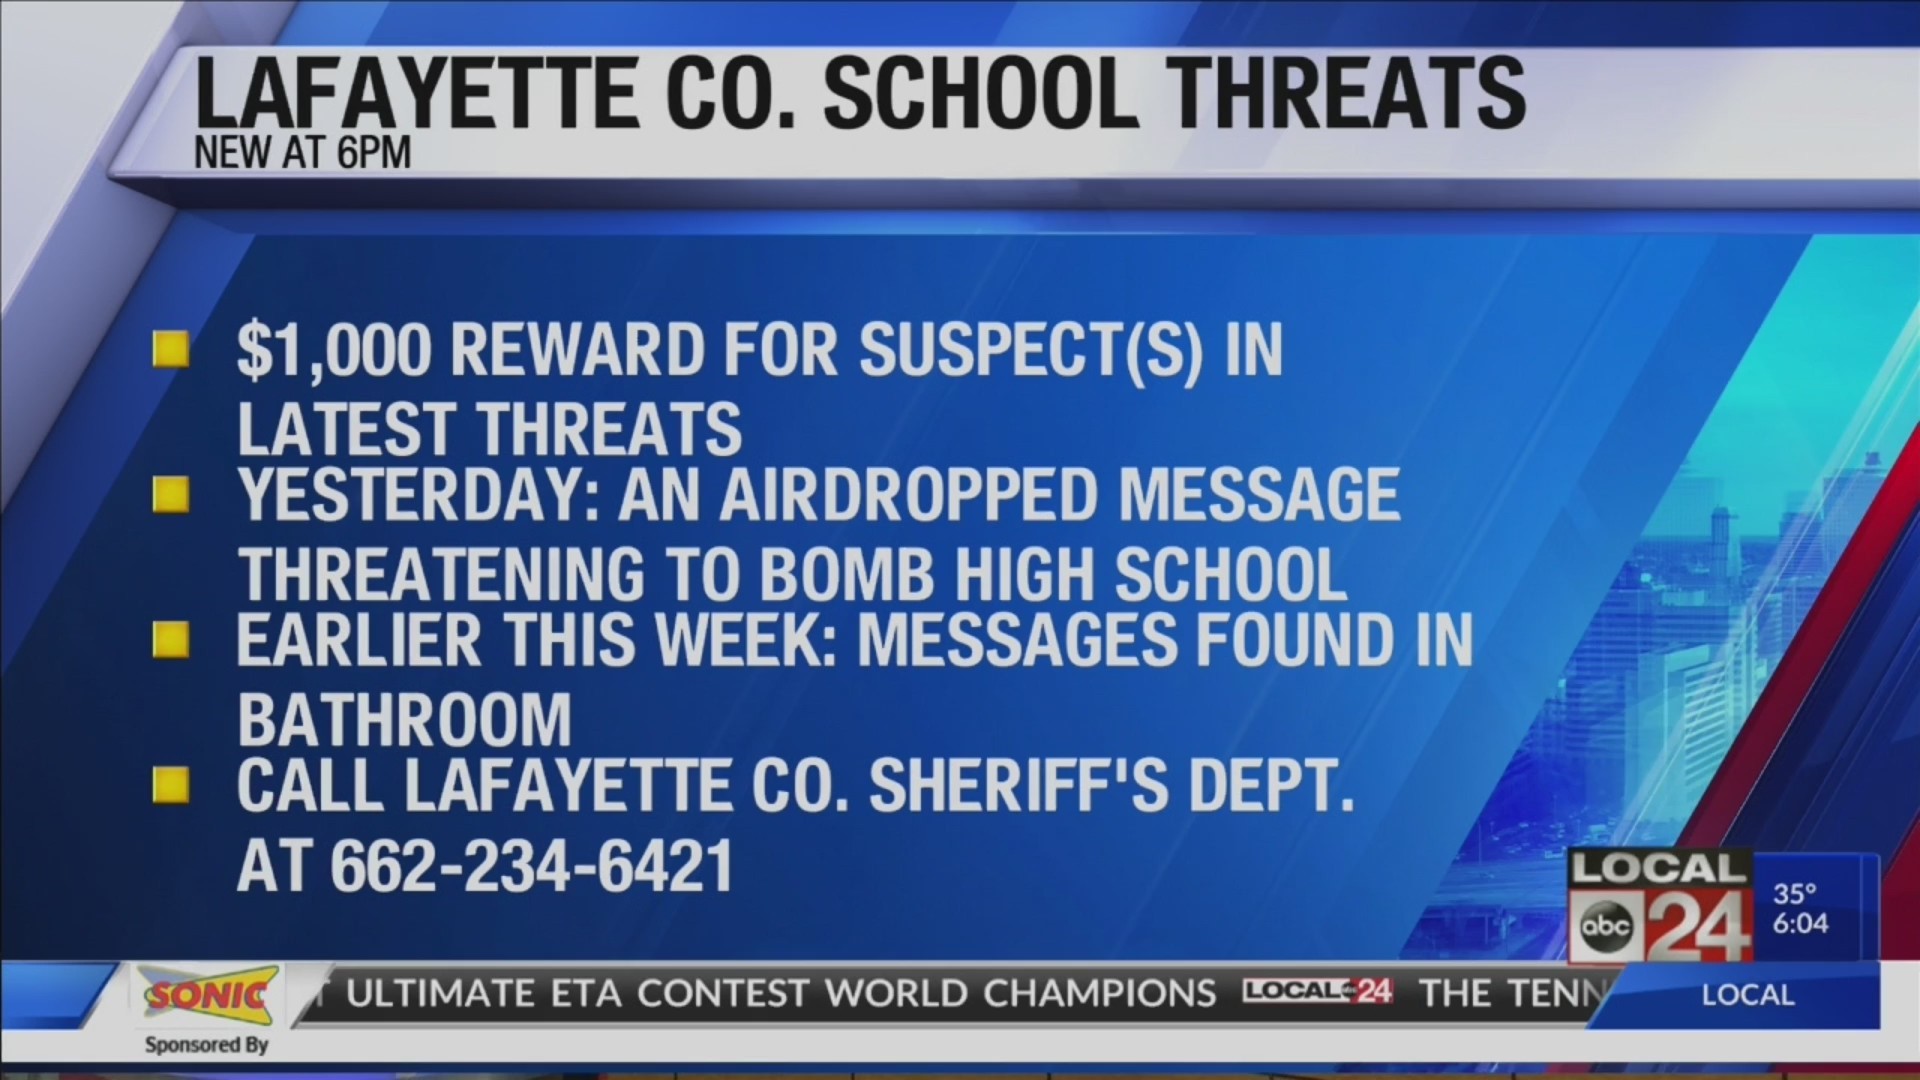 Lafayette County Sheriff's Department offers $1,000 reward for information on threats aimed at schools